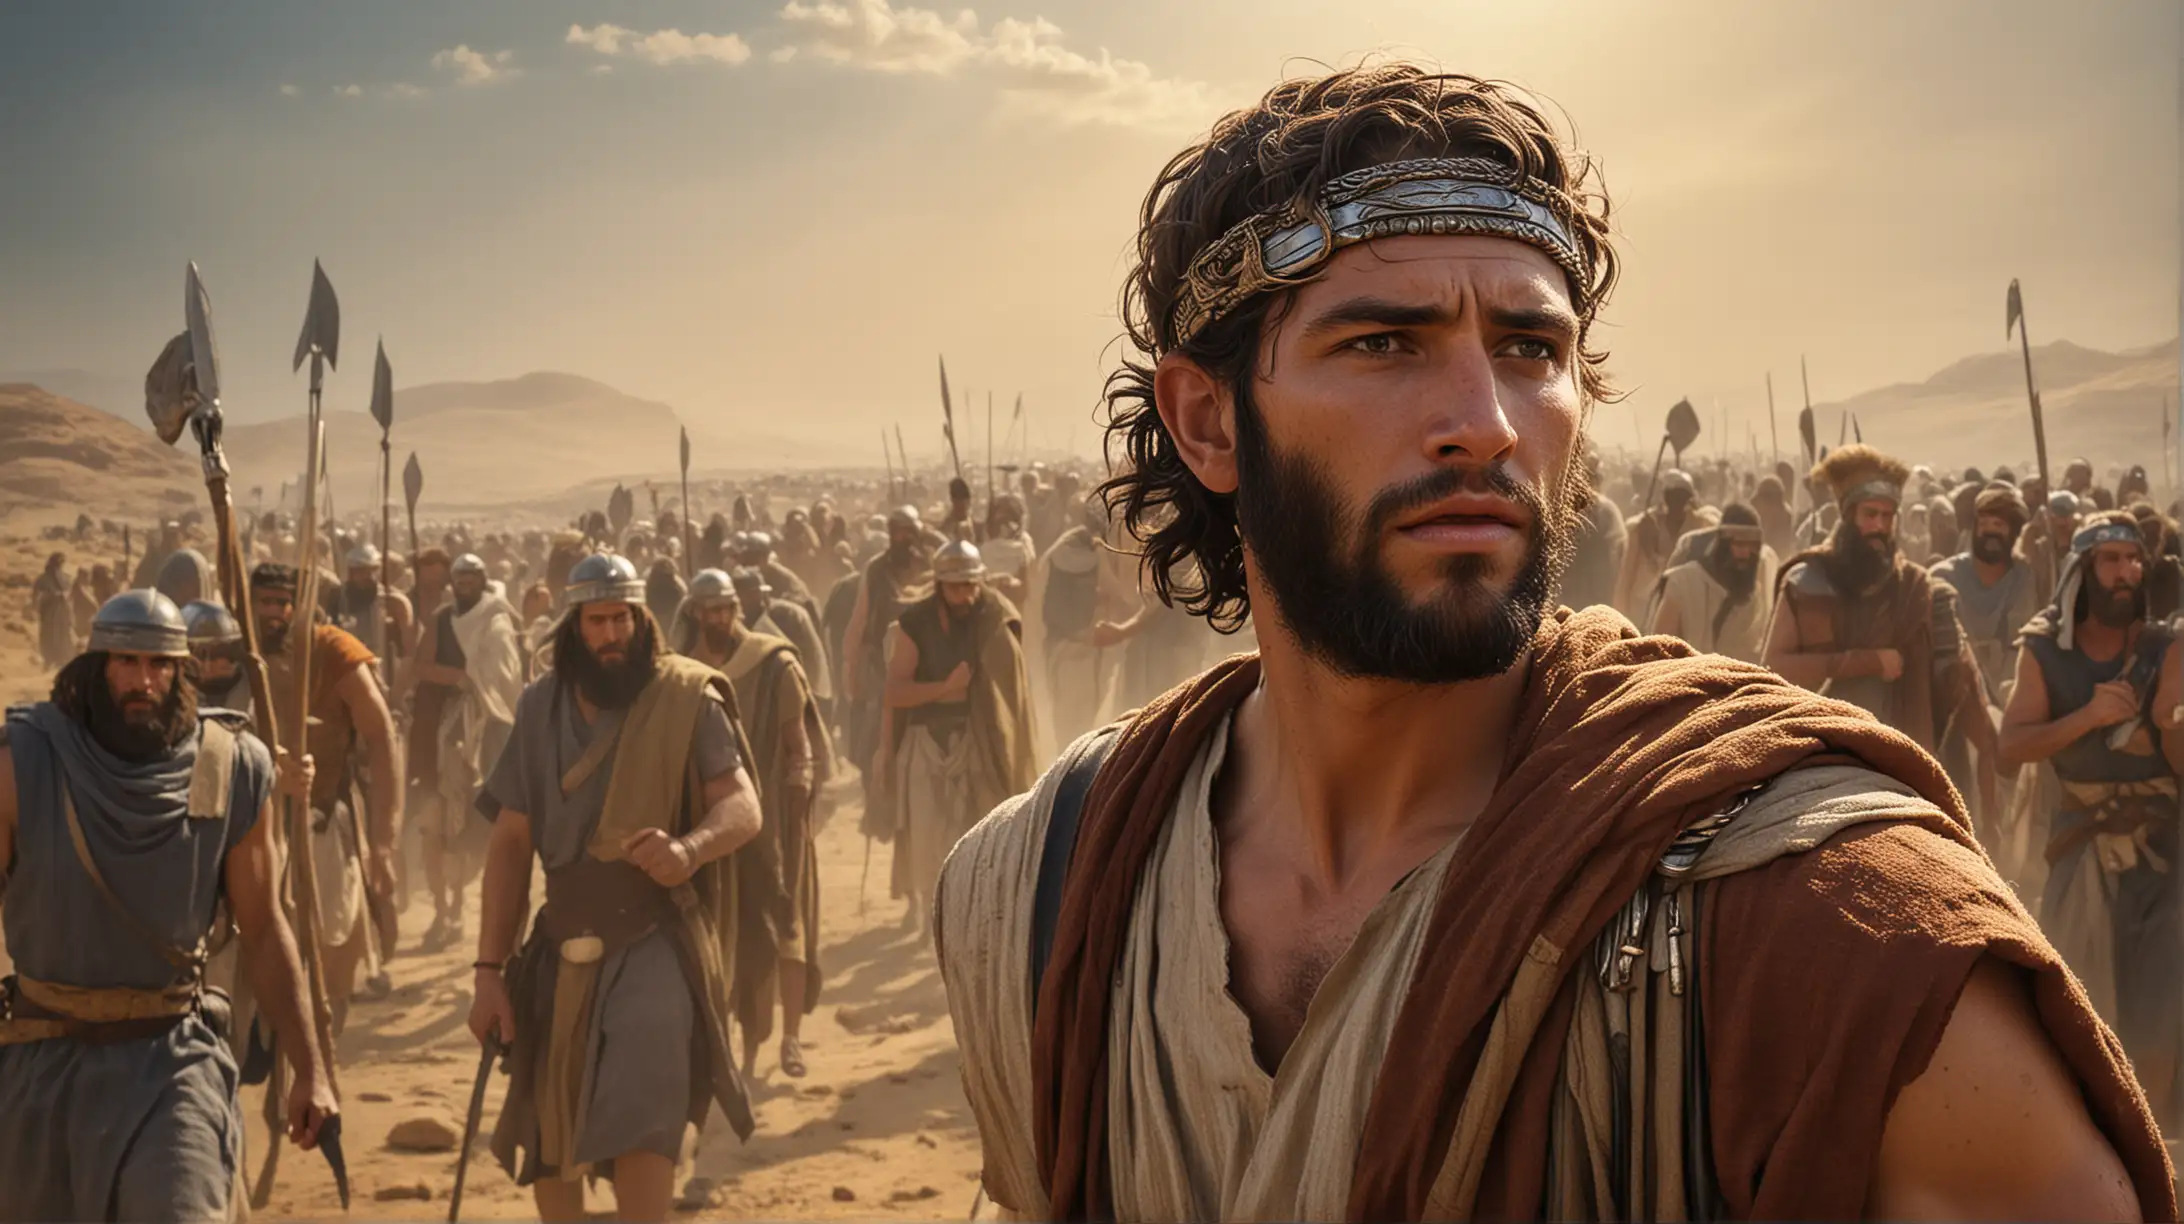 a close up image depicting the main character of Joshua from the Biblical Book of Joshua, leading the isreali people into the Promised Land. Set during the Biblical era of Moses.